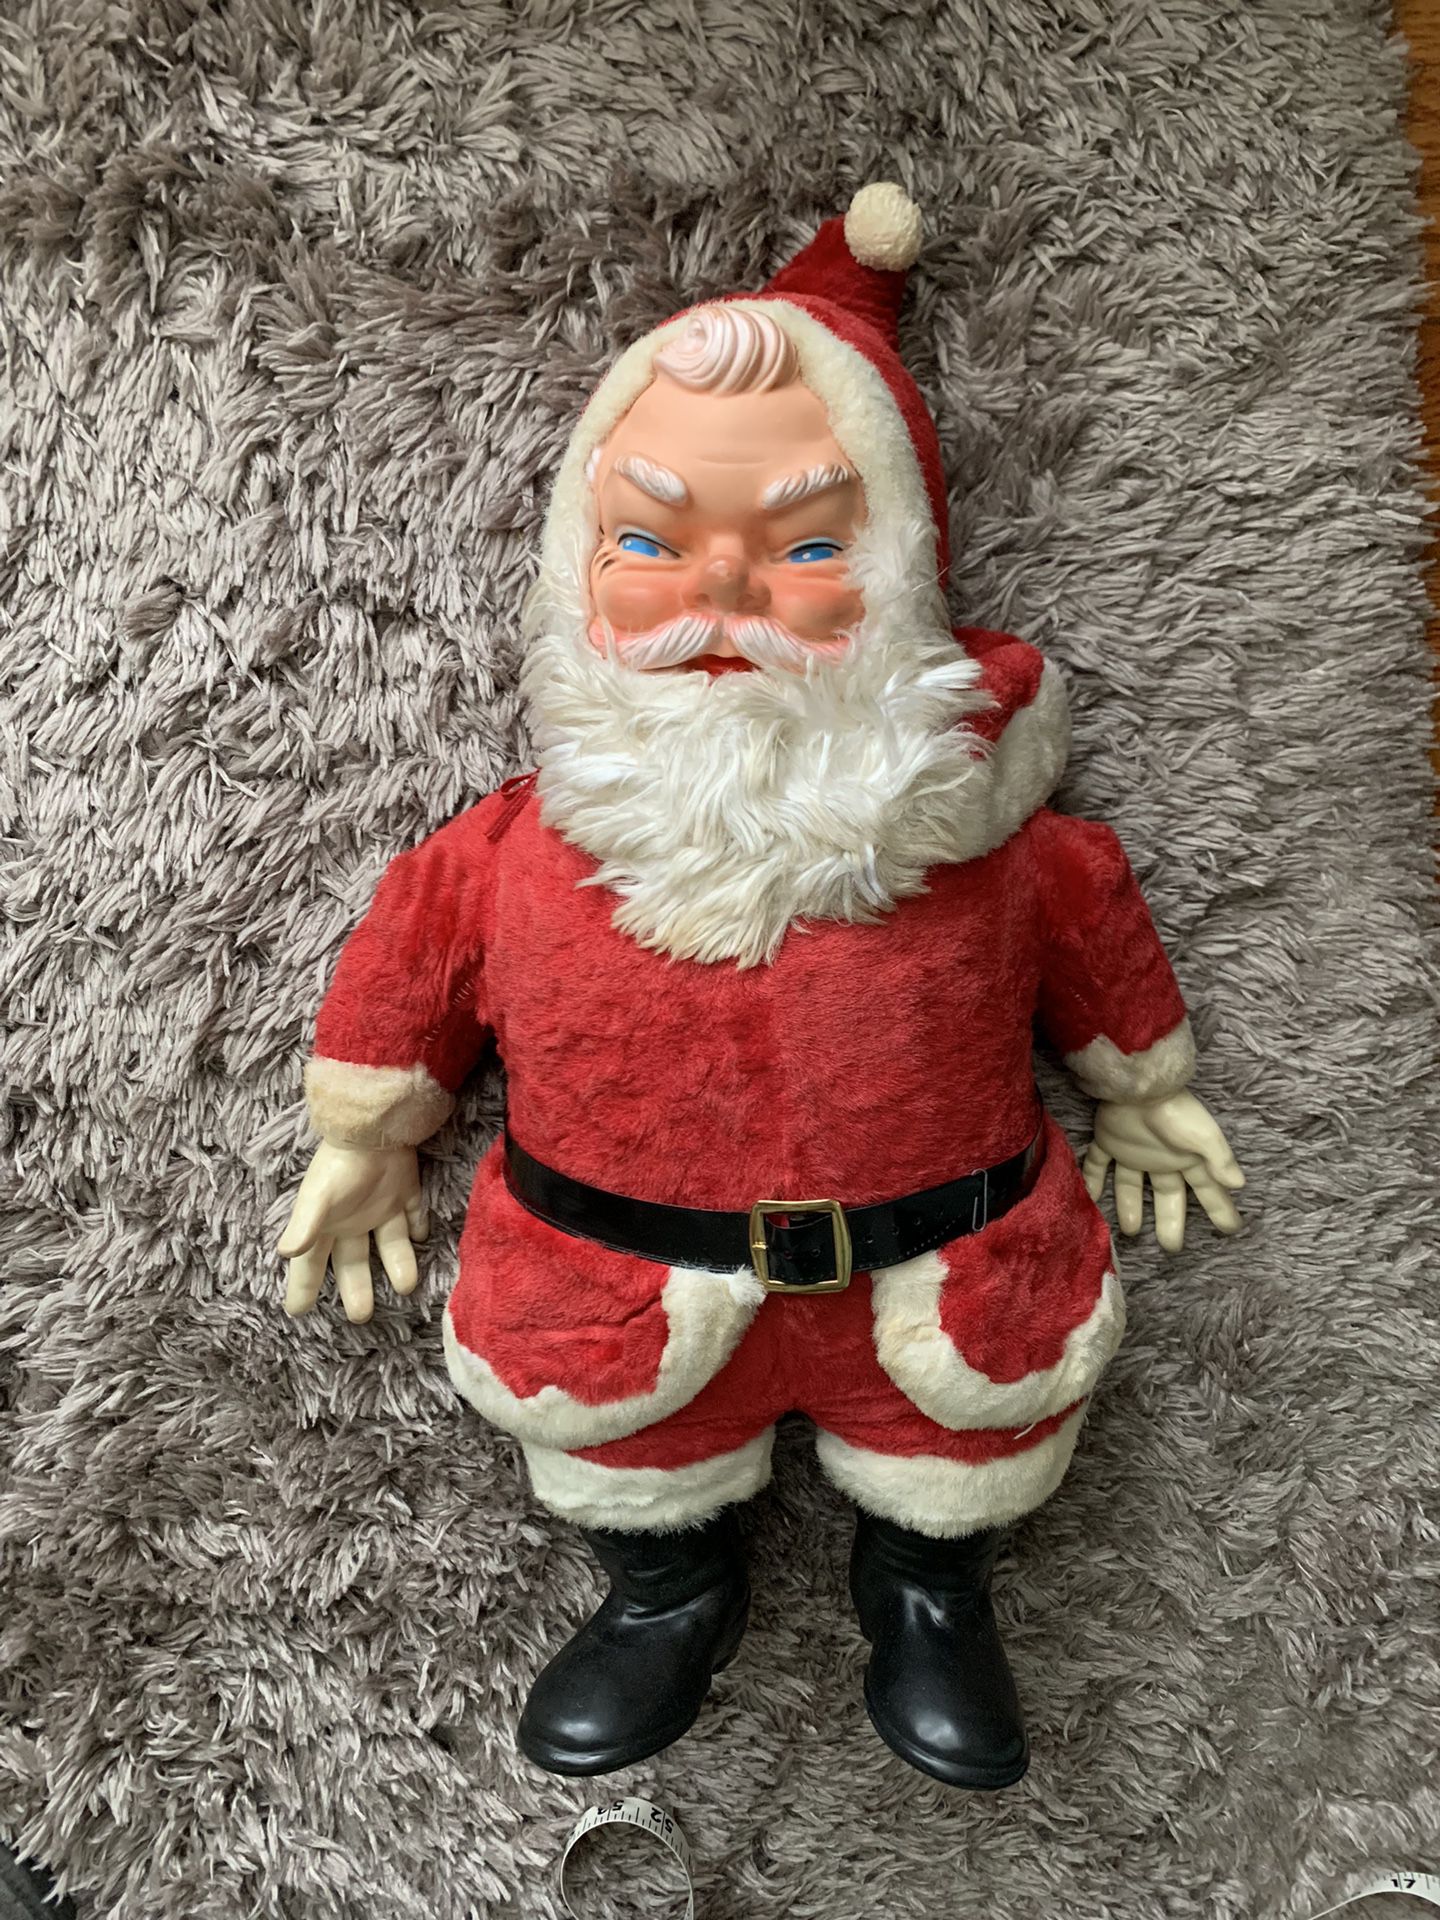 Vintage My Toy Rubber Face Christmas Santa Claus Plush Doll  24 Inch 1950s